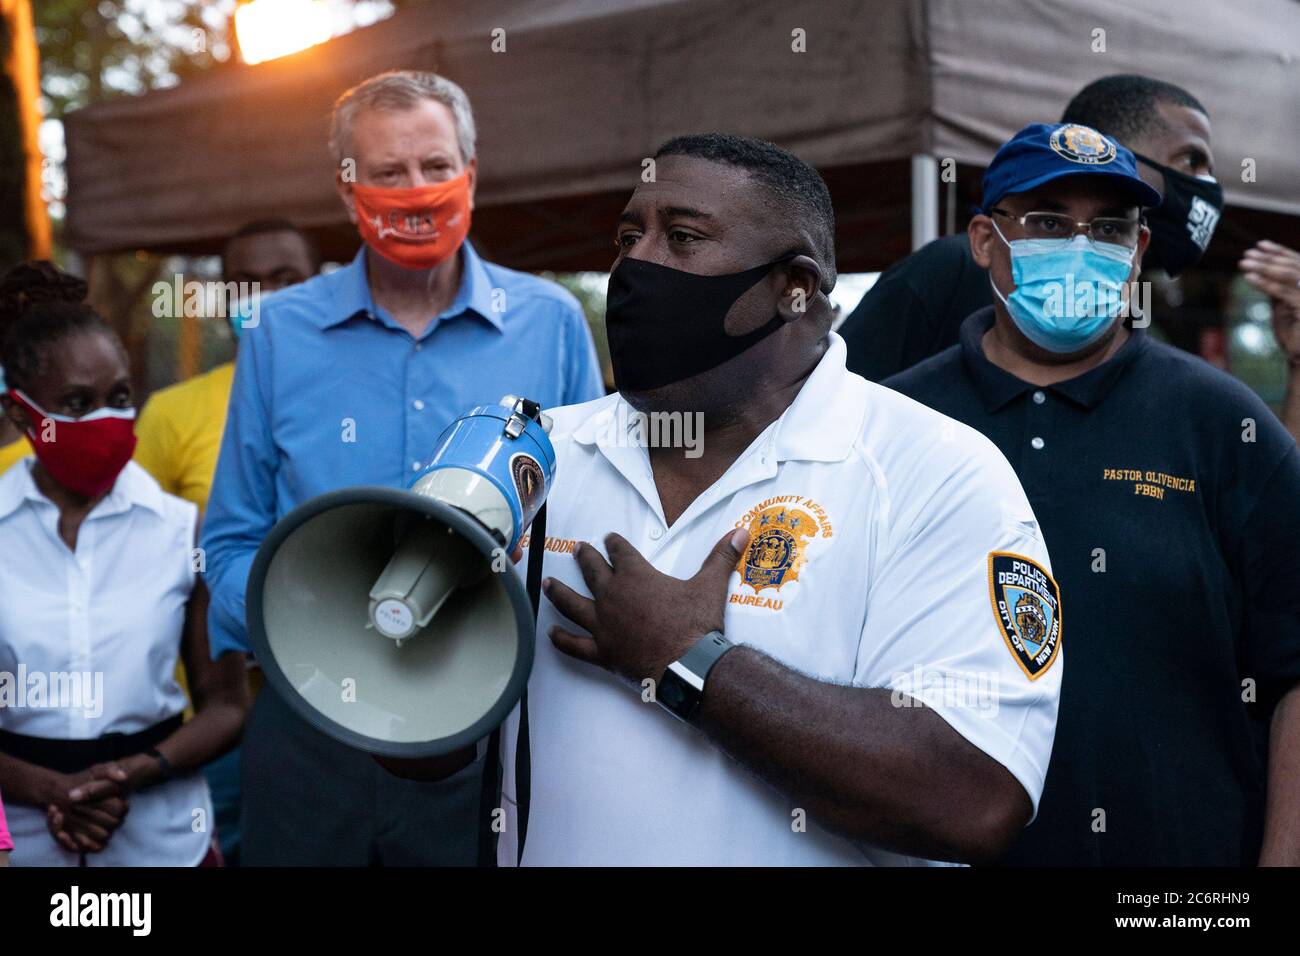 New York, United States. 11th July, 2020. NYPD Chief Jeffrey Maddrey speaks at Occupy the Corner rally in East Harlem in response on gun violence in New York on July 11, 2020. Gun violence in 2020 surged by more than 100% in New York City mostly in neighborhoods with high rate of poverty and high level of COVID-19 cases. Community activists and police department encreased presence in those areas in order to stop gun violence. (Photo by Lev Radin/Sipa USA) Credit: Sipa USA/Alamy Live News Stock Photo